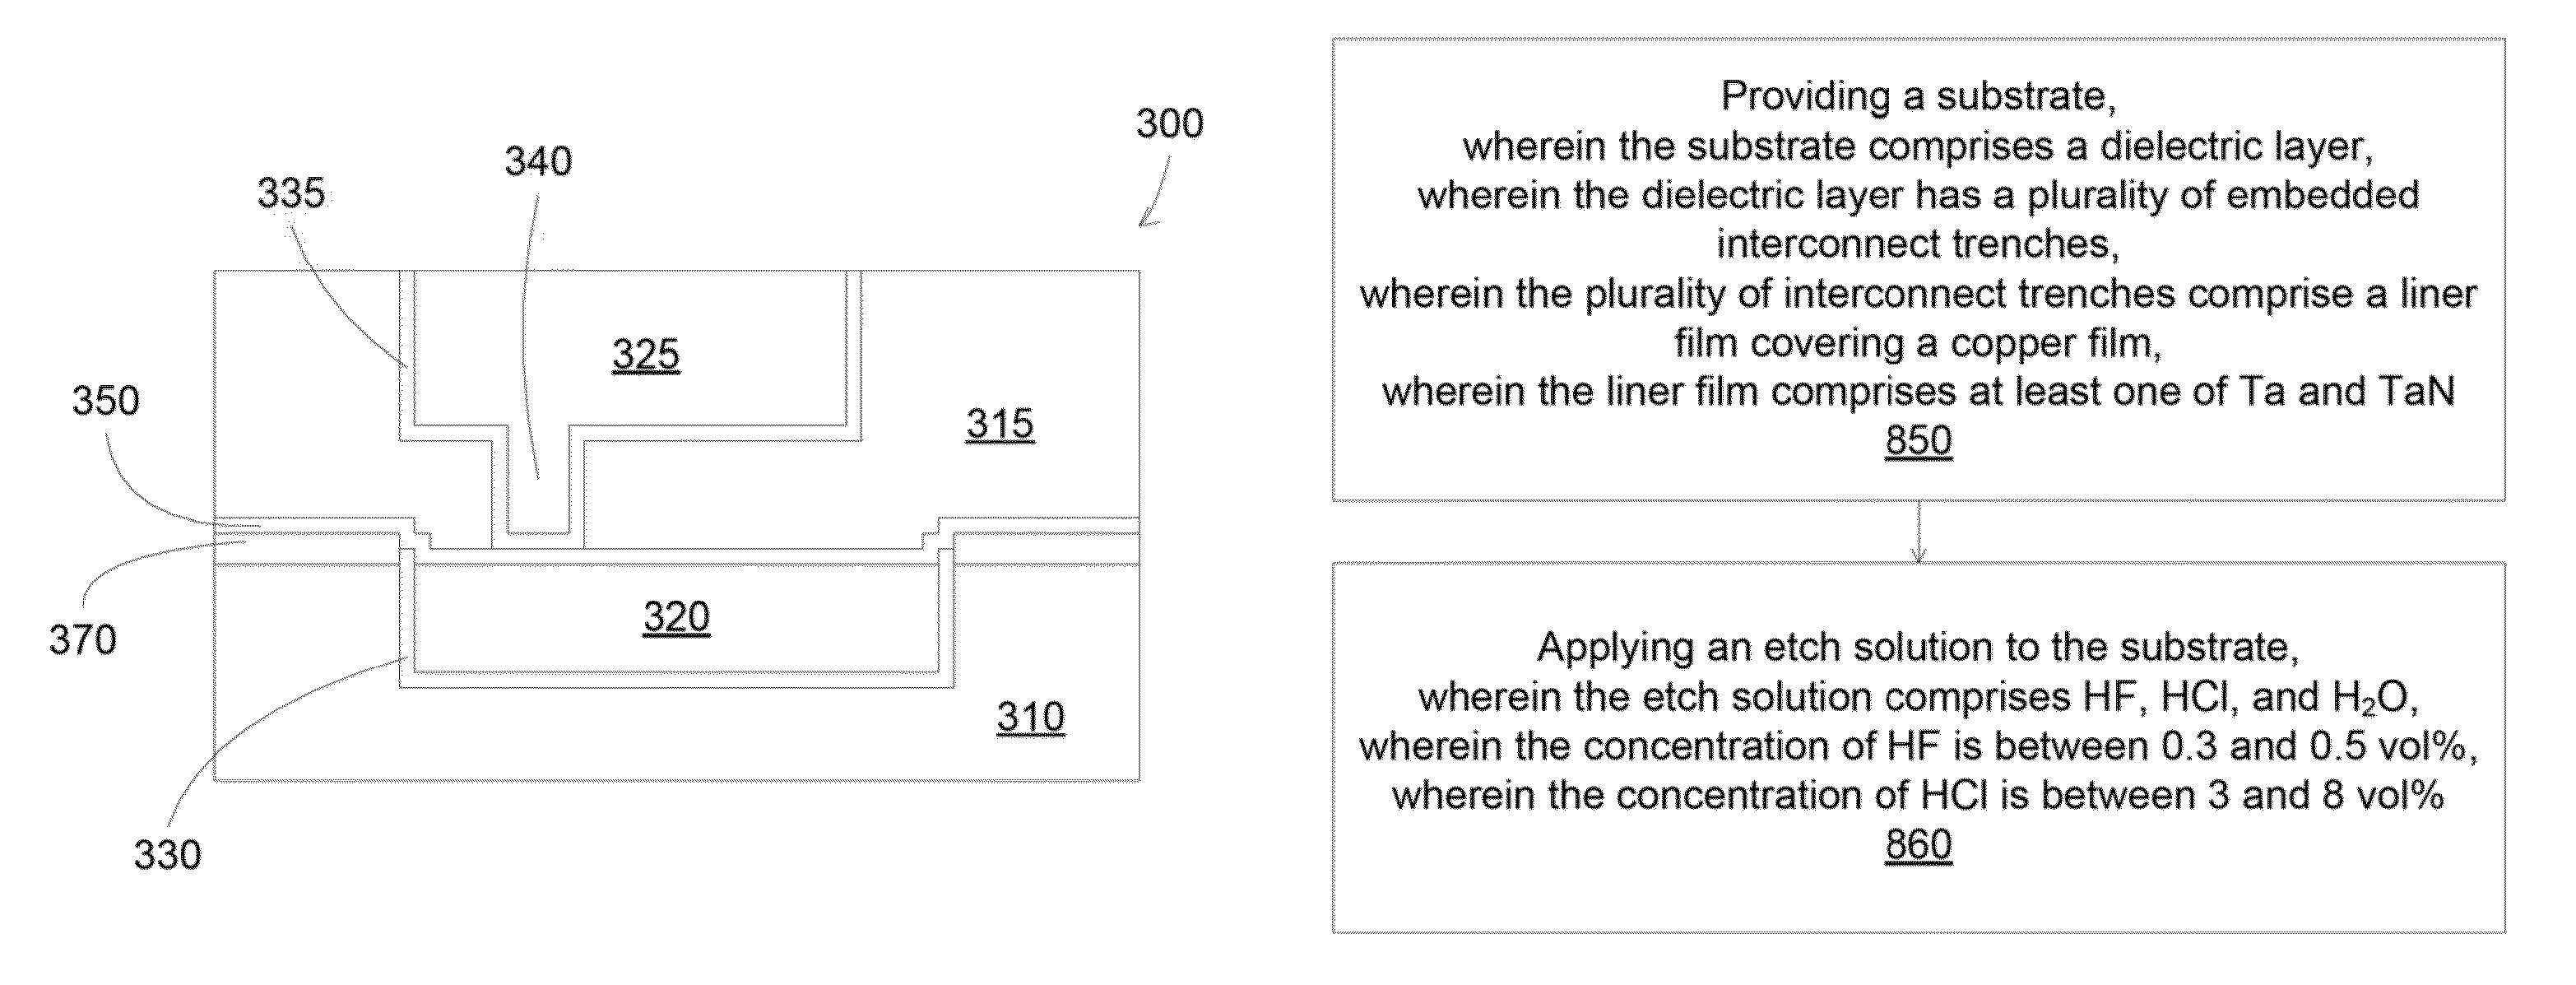 Method to etch Cu/Ta/TaN selectively using dilute aqueous HF/HCI solution